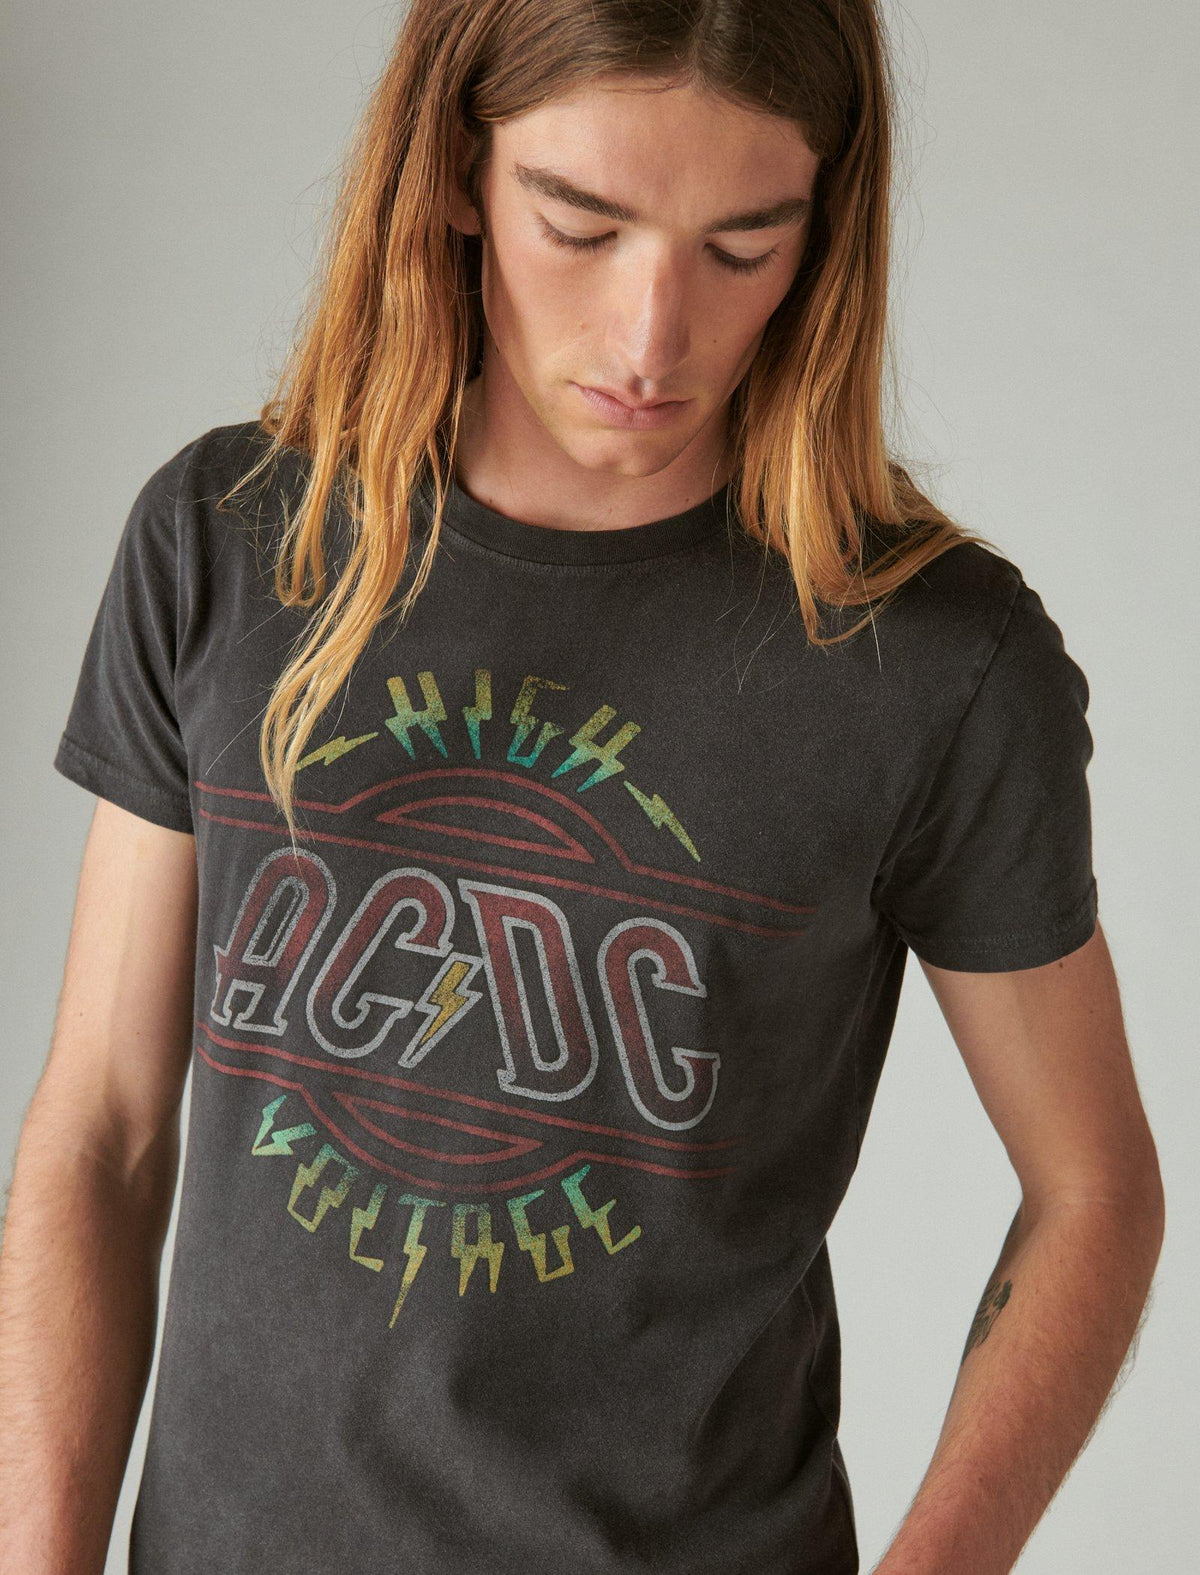 Lucky Brand Acdc High Voltage Tee - Men's Clothing Tops Shirts Tee Graphic T Shirts Jet Black